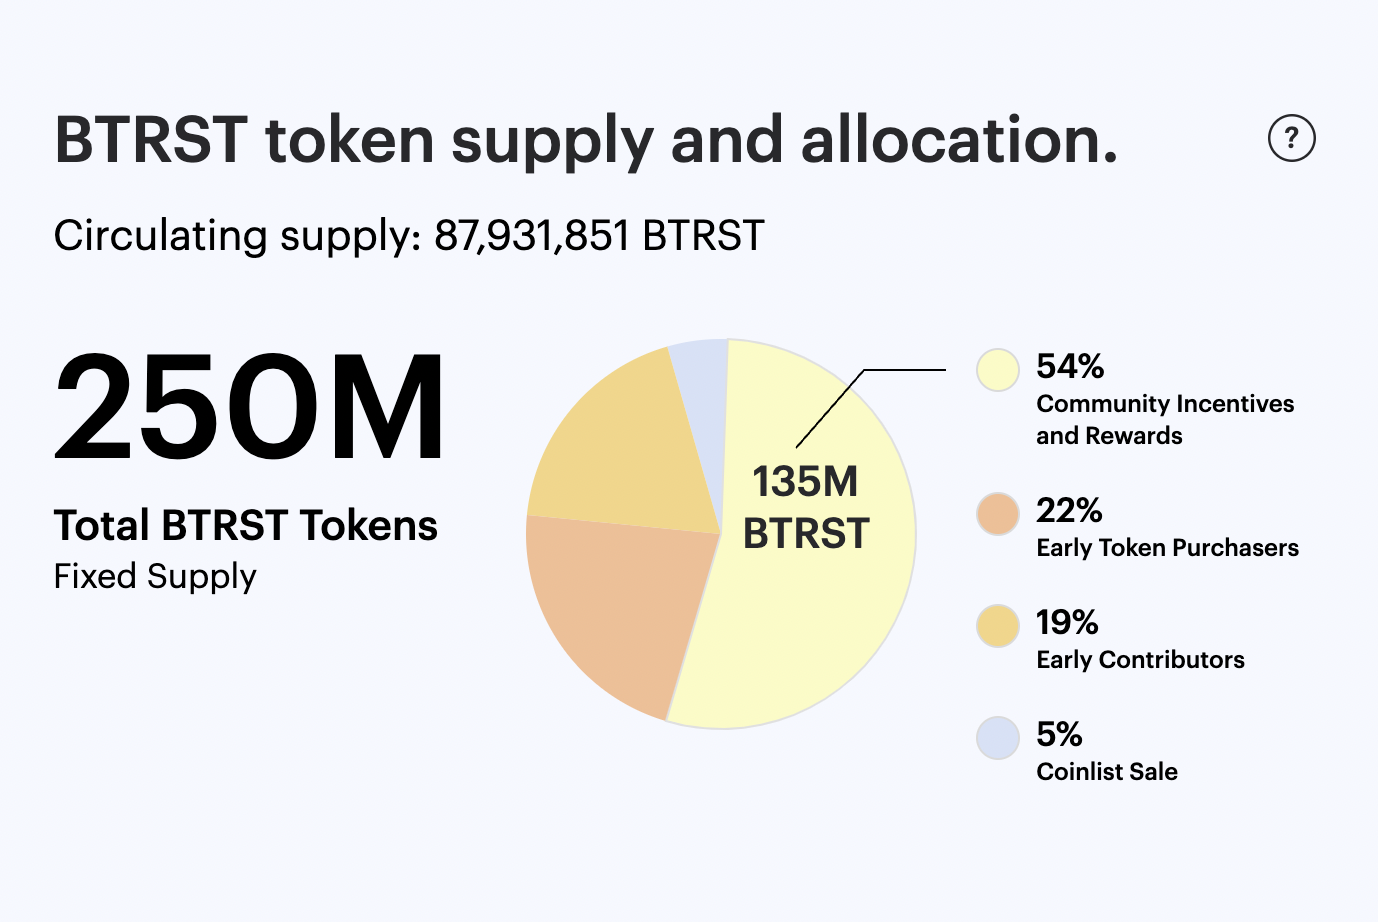 BTRST token supply and allocation